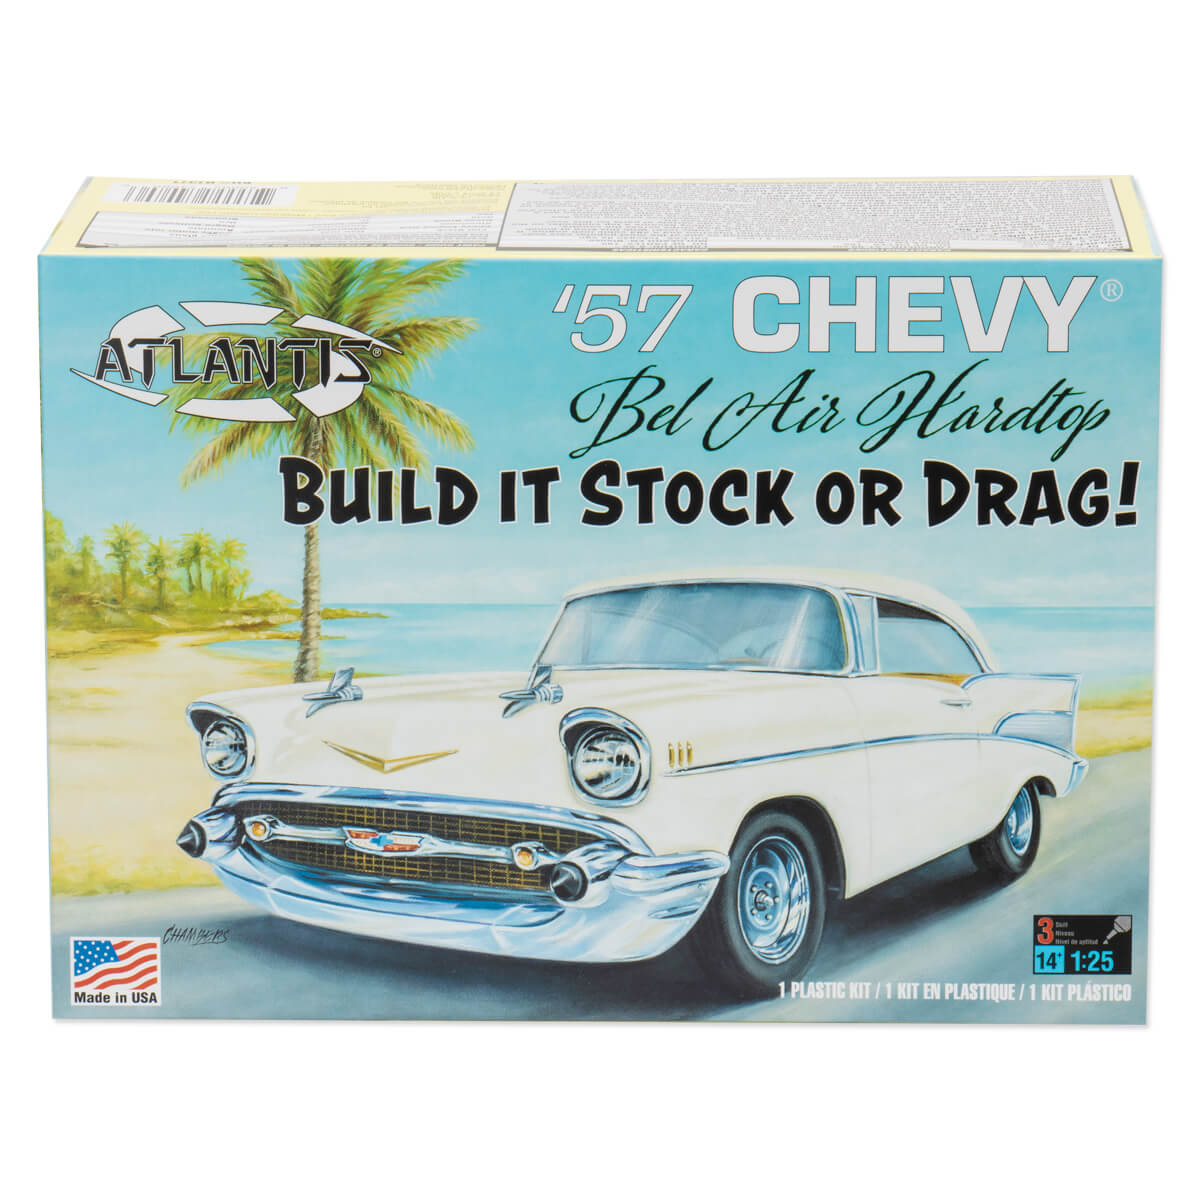 CHEVROLET USA-1 FLAG STYLE miniature LICENSE PLATES for 1/25 scale MODEL CARS 